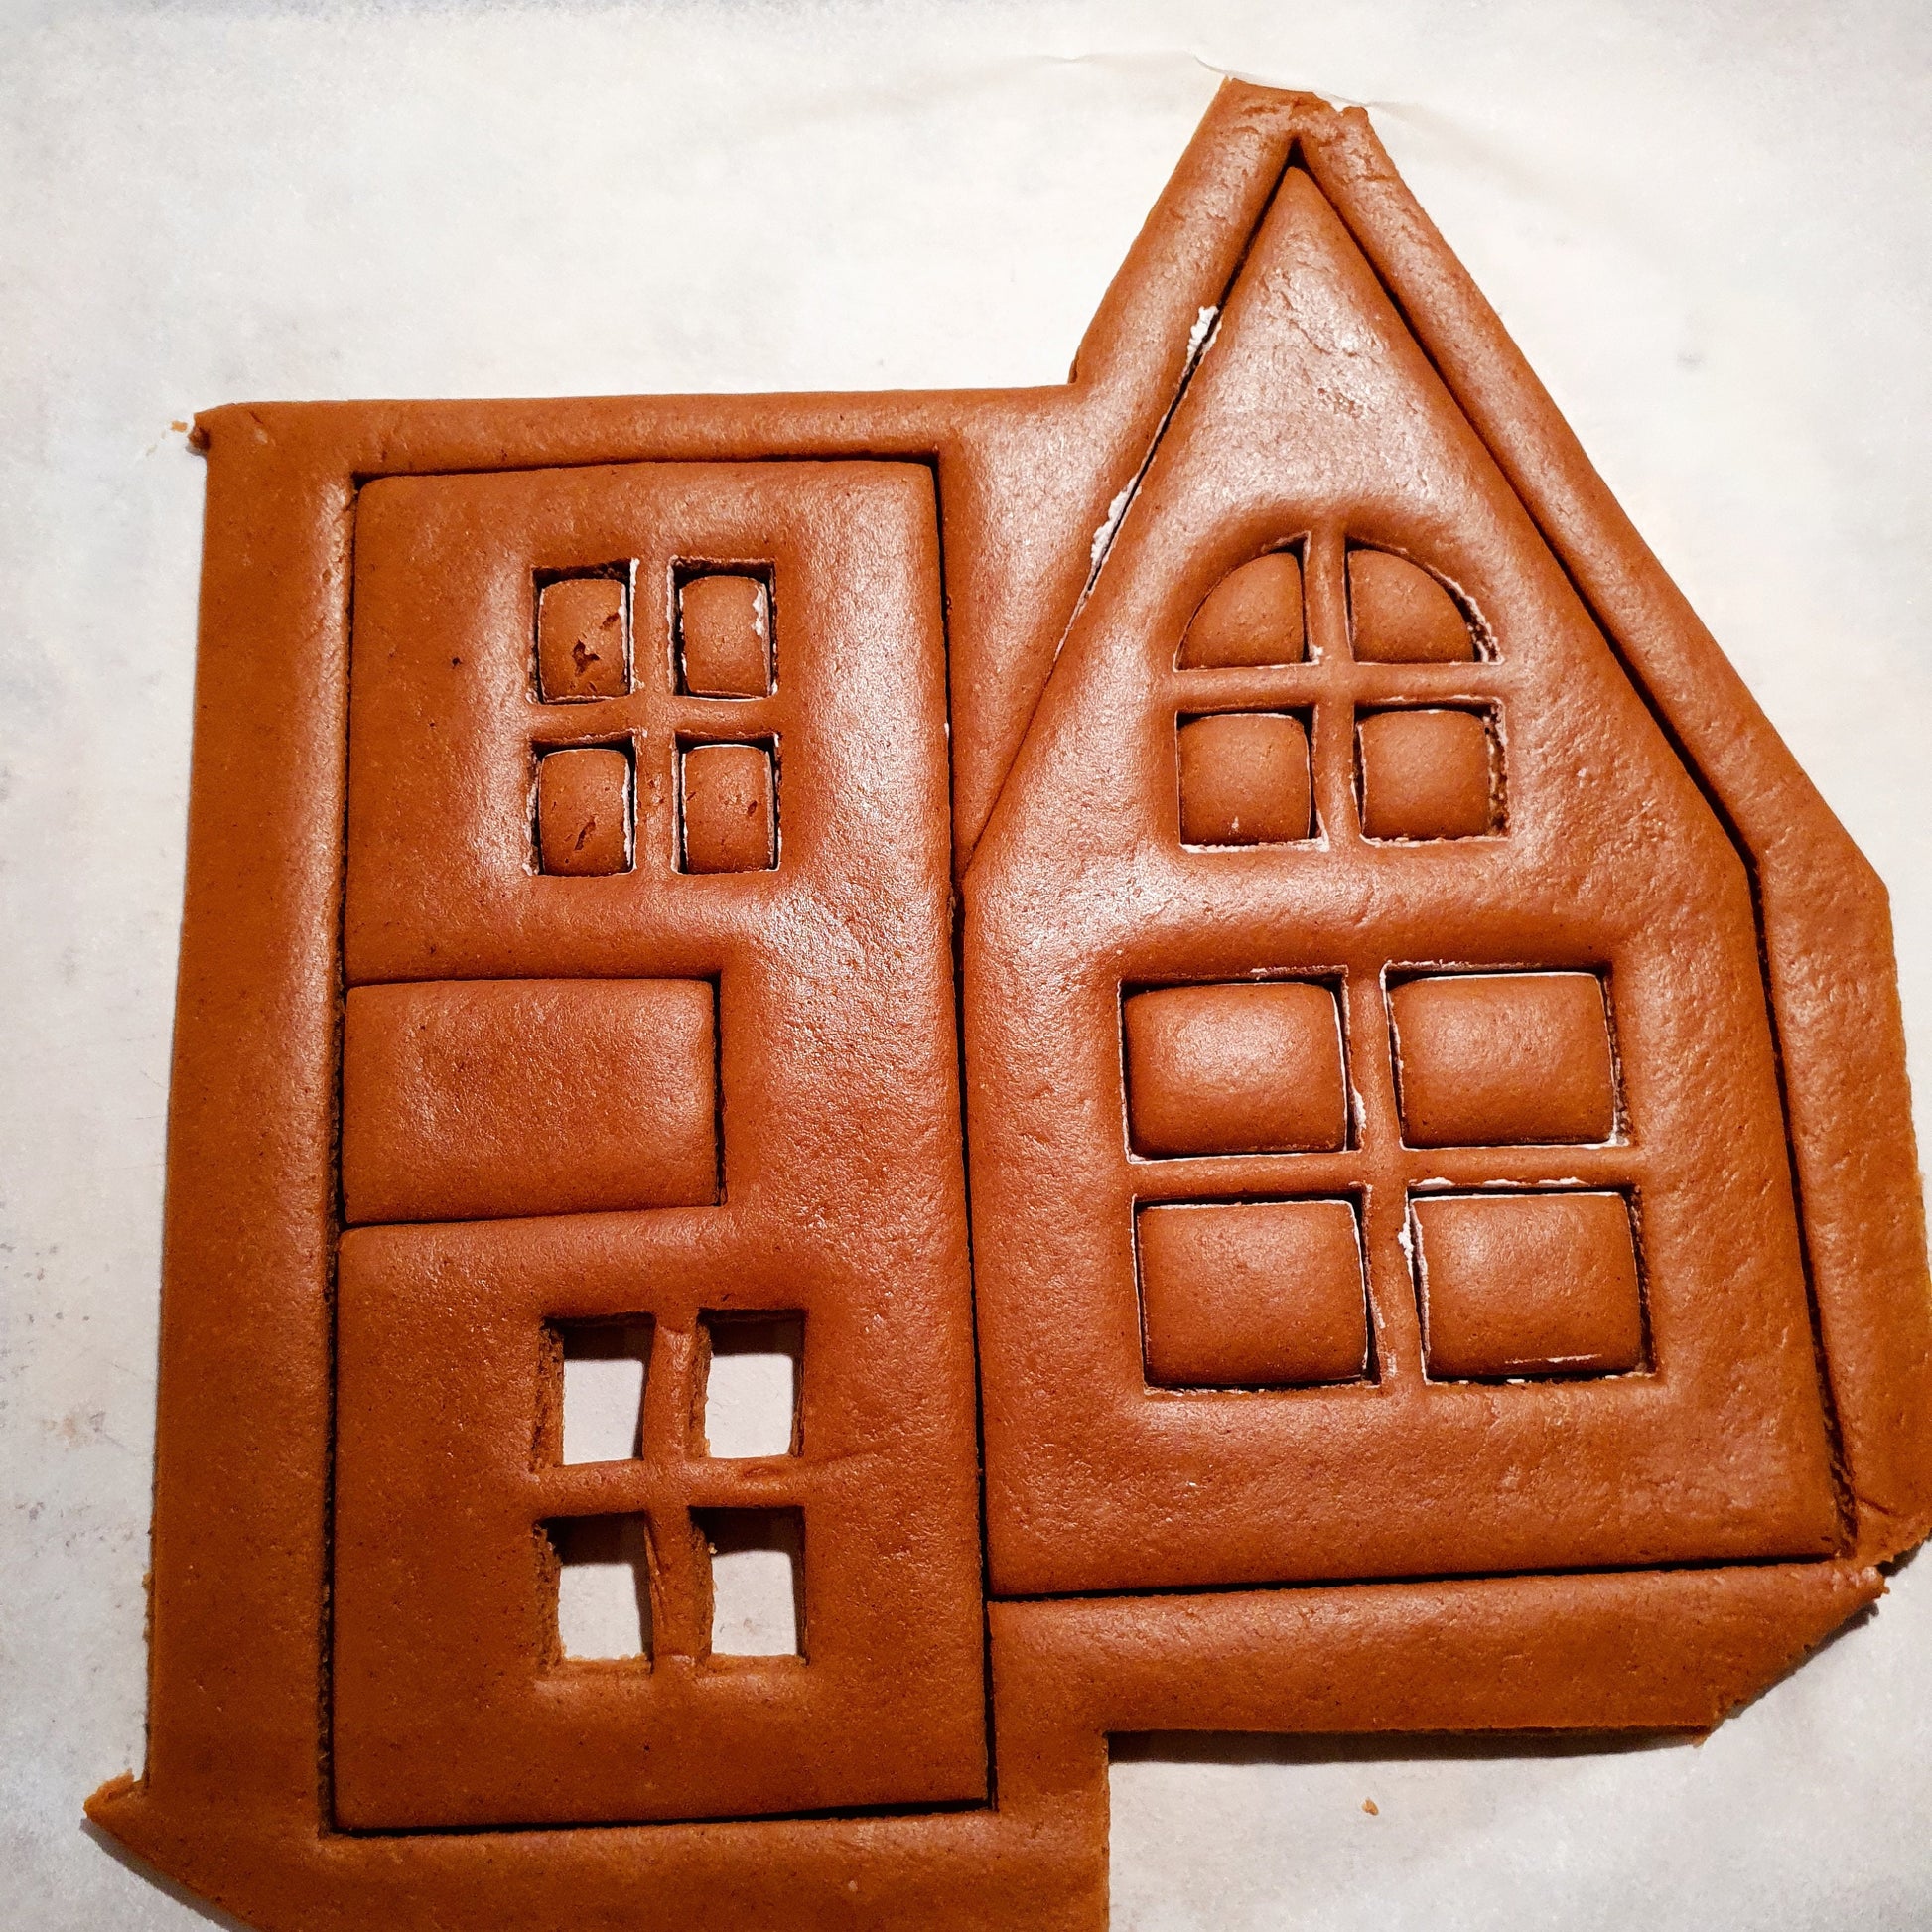 Christmas Gingerbread House Patterns In 4 Sizes. Gingerbread House Patterns From Tiny To Huge!